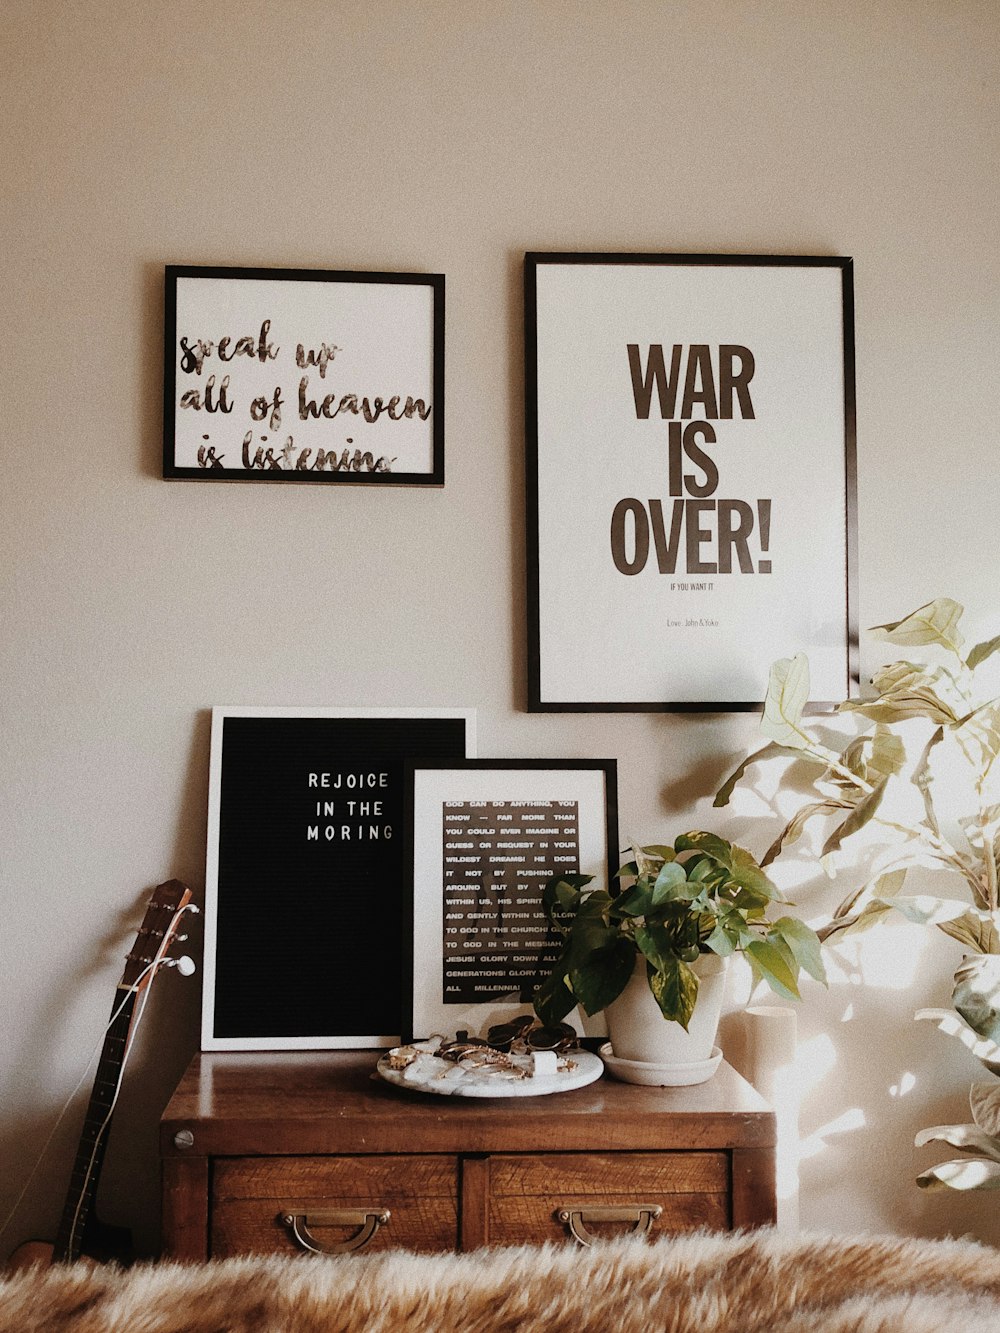 War is Over sign on wall inside room